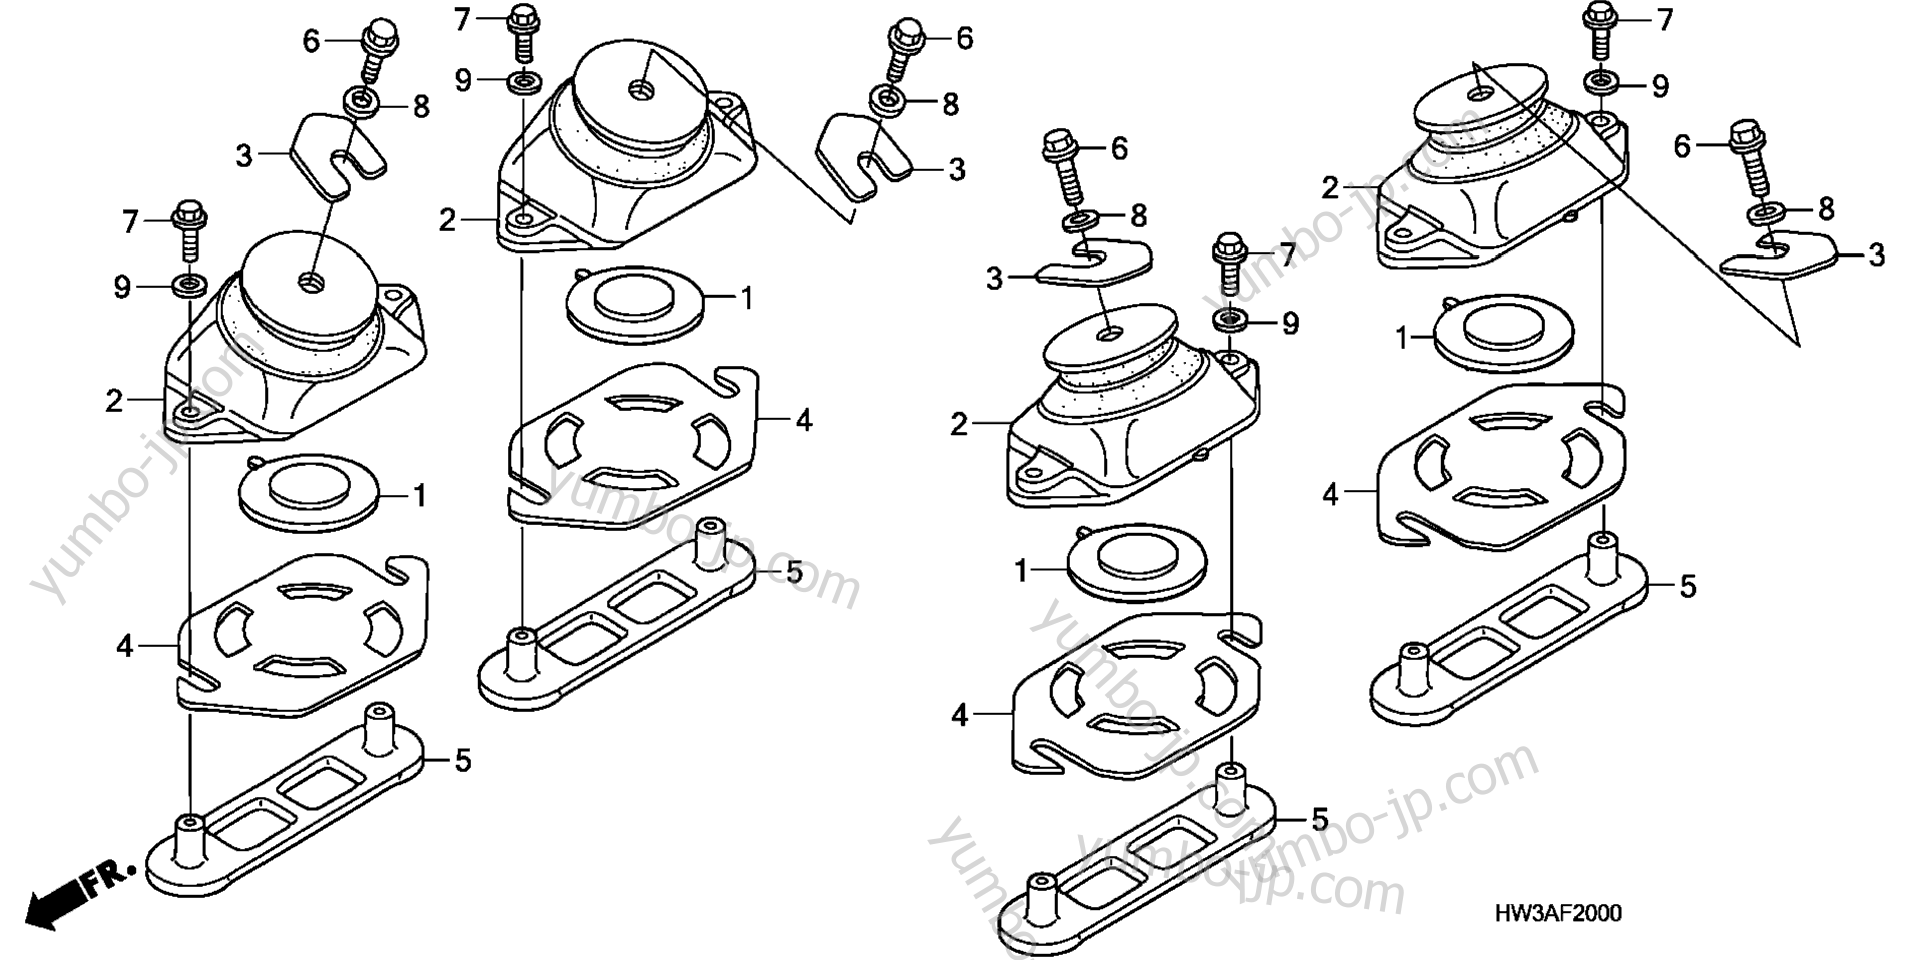 ENGINE MOUNT for watercrafts HONDA ARX1200T2 A 2007 year